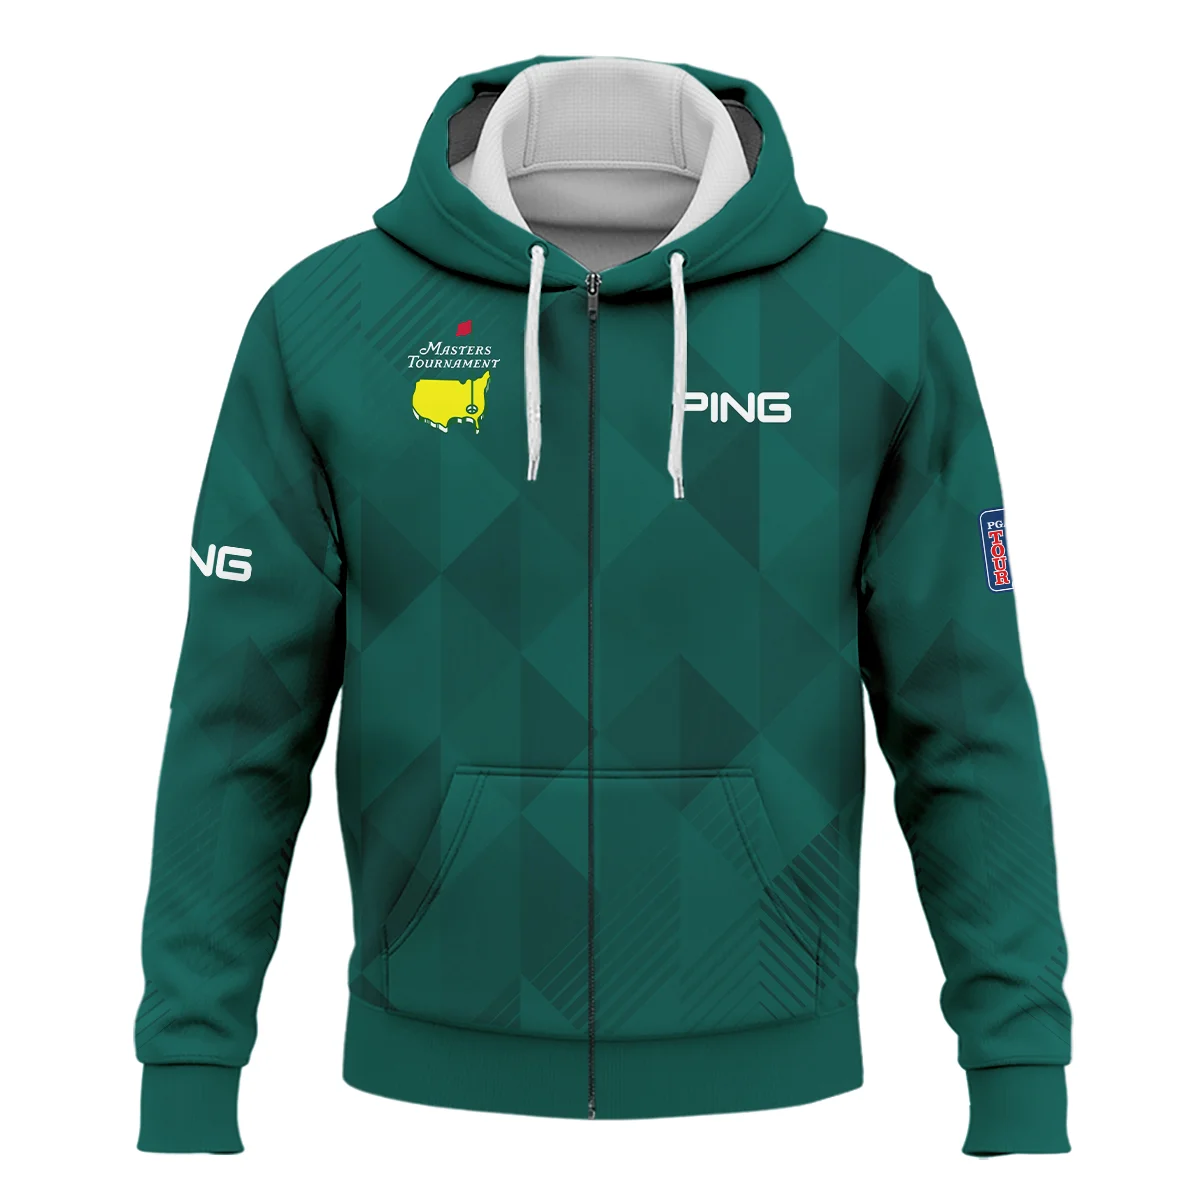 Masters Tournament Golf Sport Ping Hoodie Shirt Sports Triangle Abstract Green Hoodie Shirt